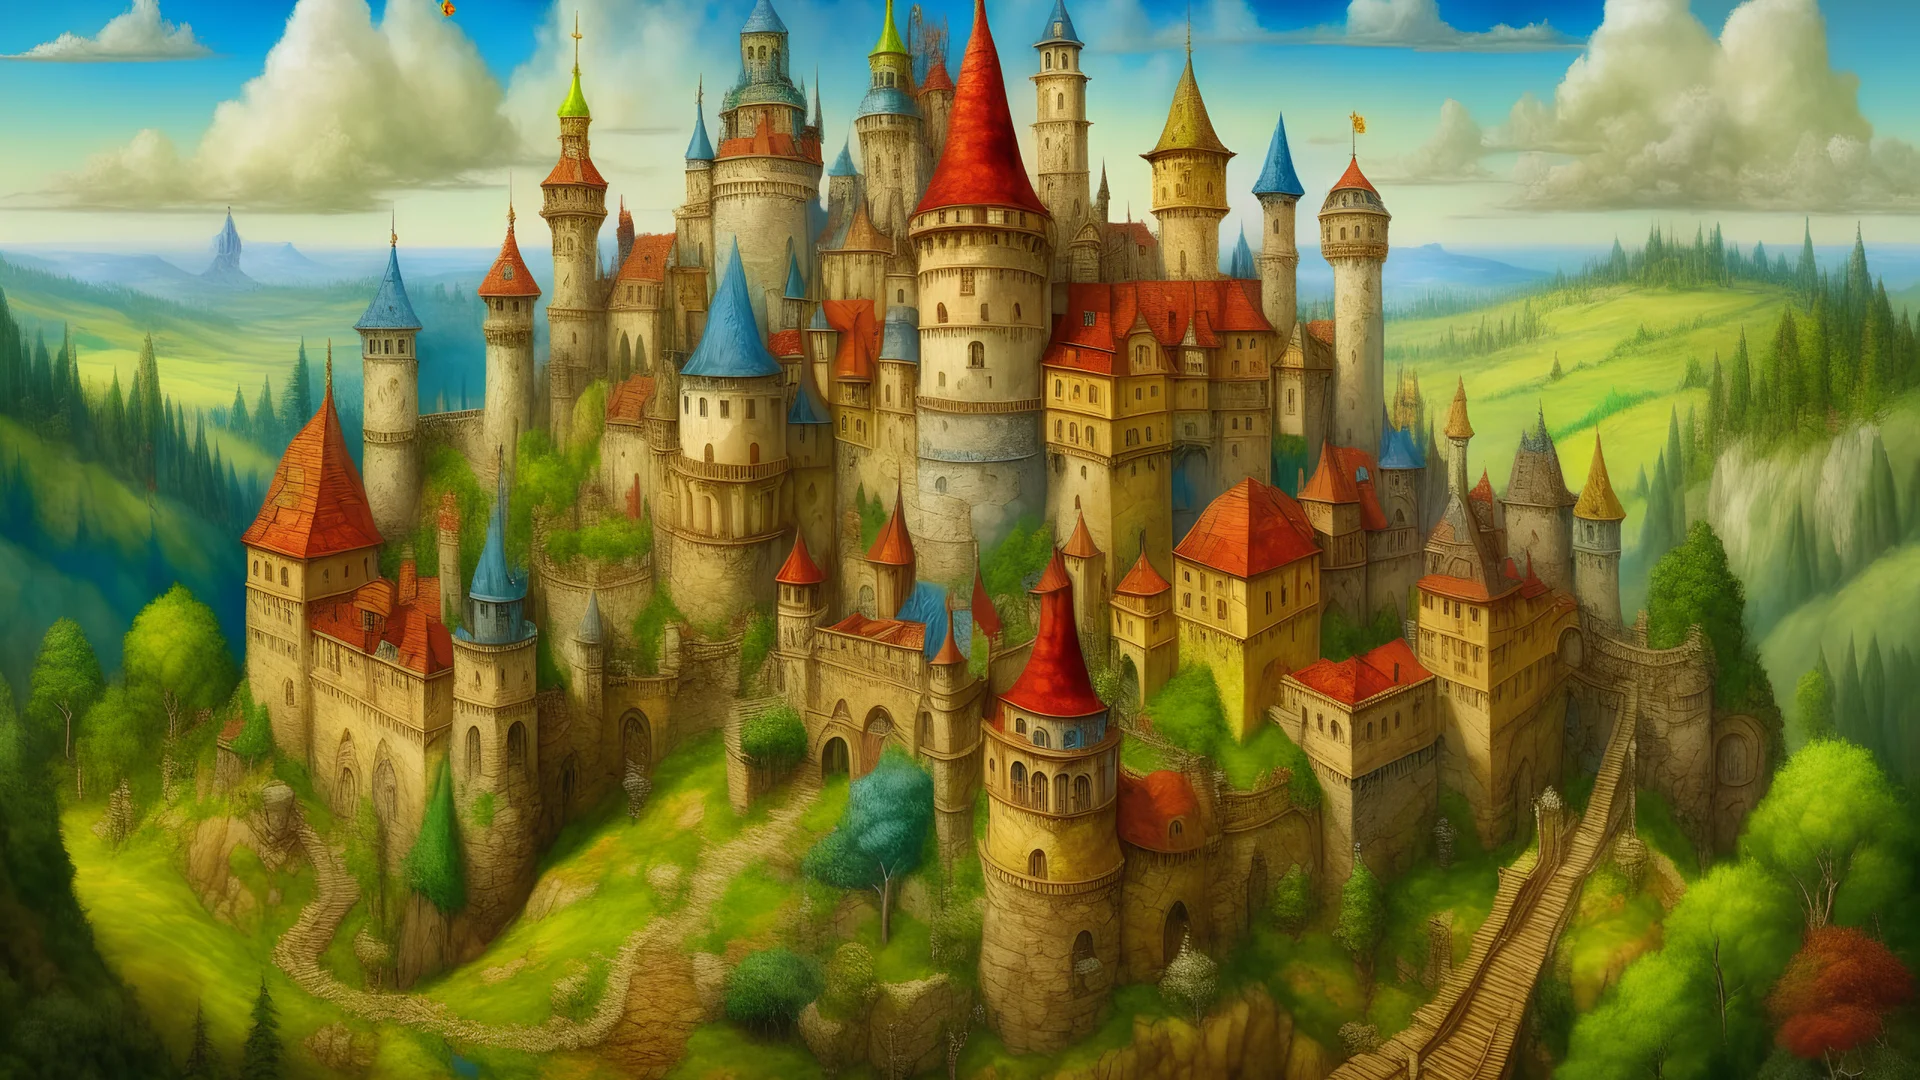 3D 16:9 VERY colorful hyper-realistic detailed painting of Castles in the land of Nod